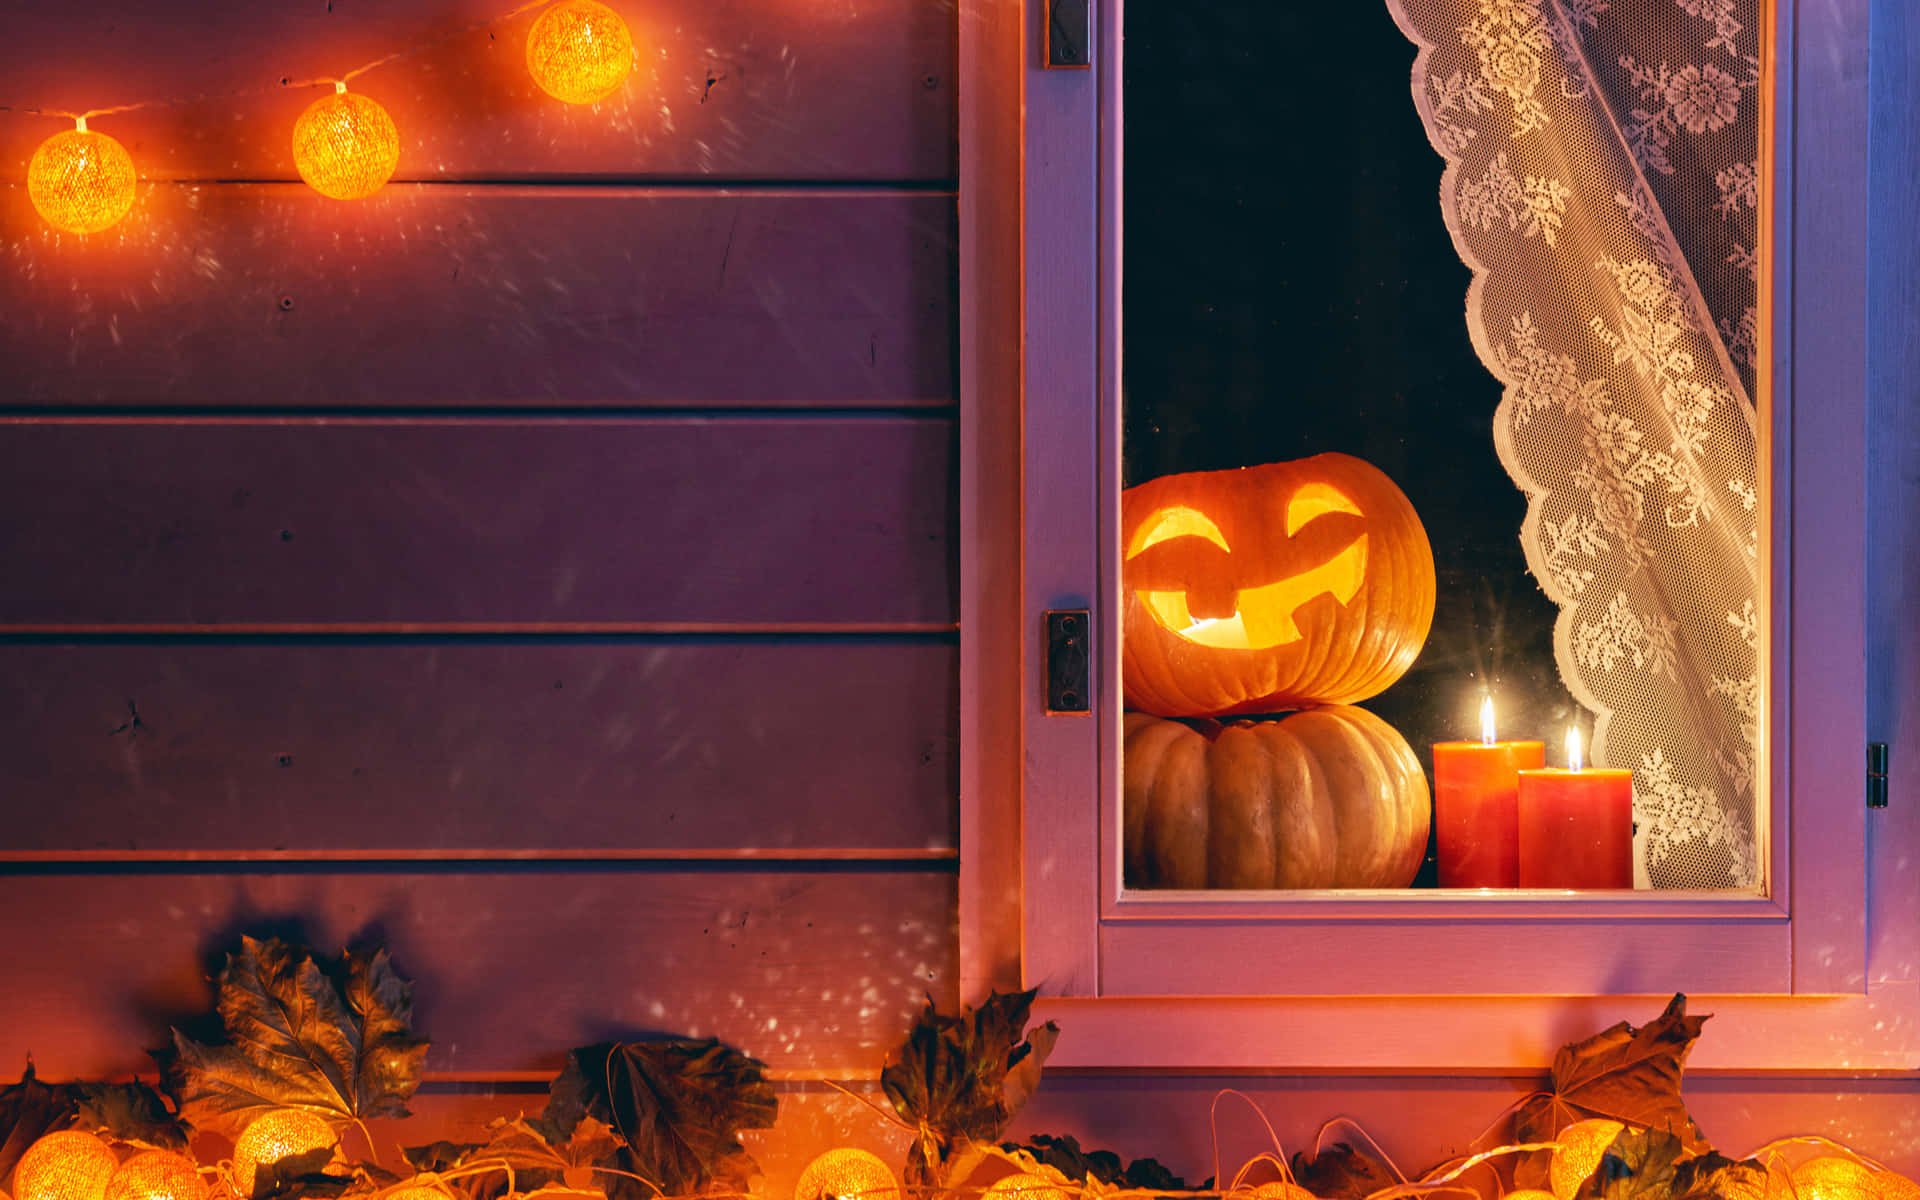 Get Ready for Halloween with a Spooky Customized MacBook Wallpaper